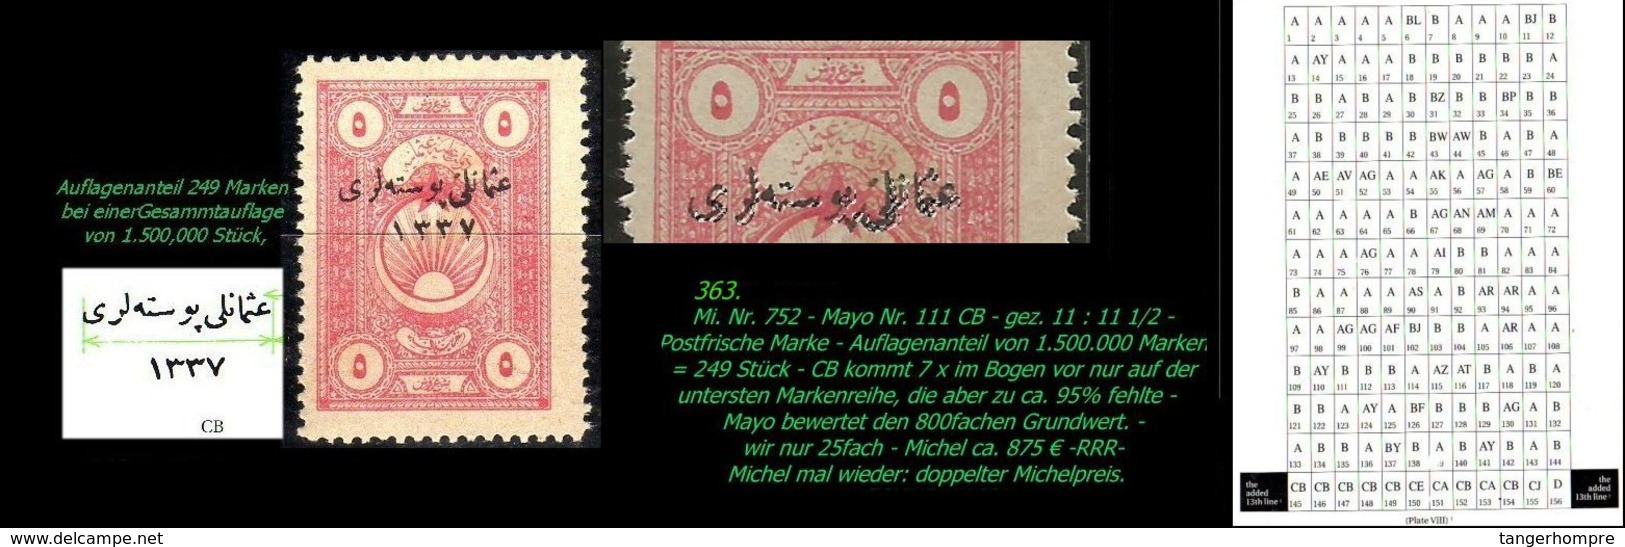 EARLY OTTOMAN SPECIALIZED FOR SPECIALIST, SEE...Mi. Nr. 752 - Mayo 111 CB - Nur 249 Marken -RRR- - 1920-21 Anatolie